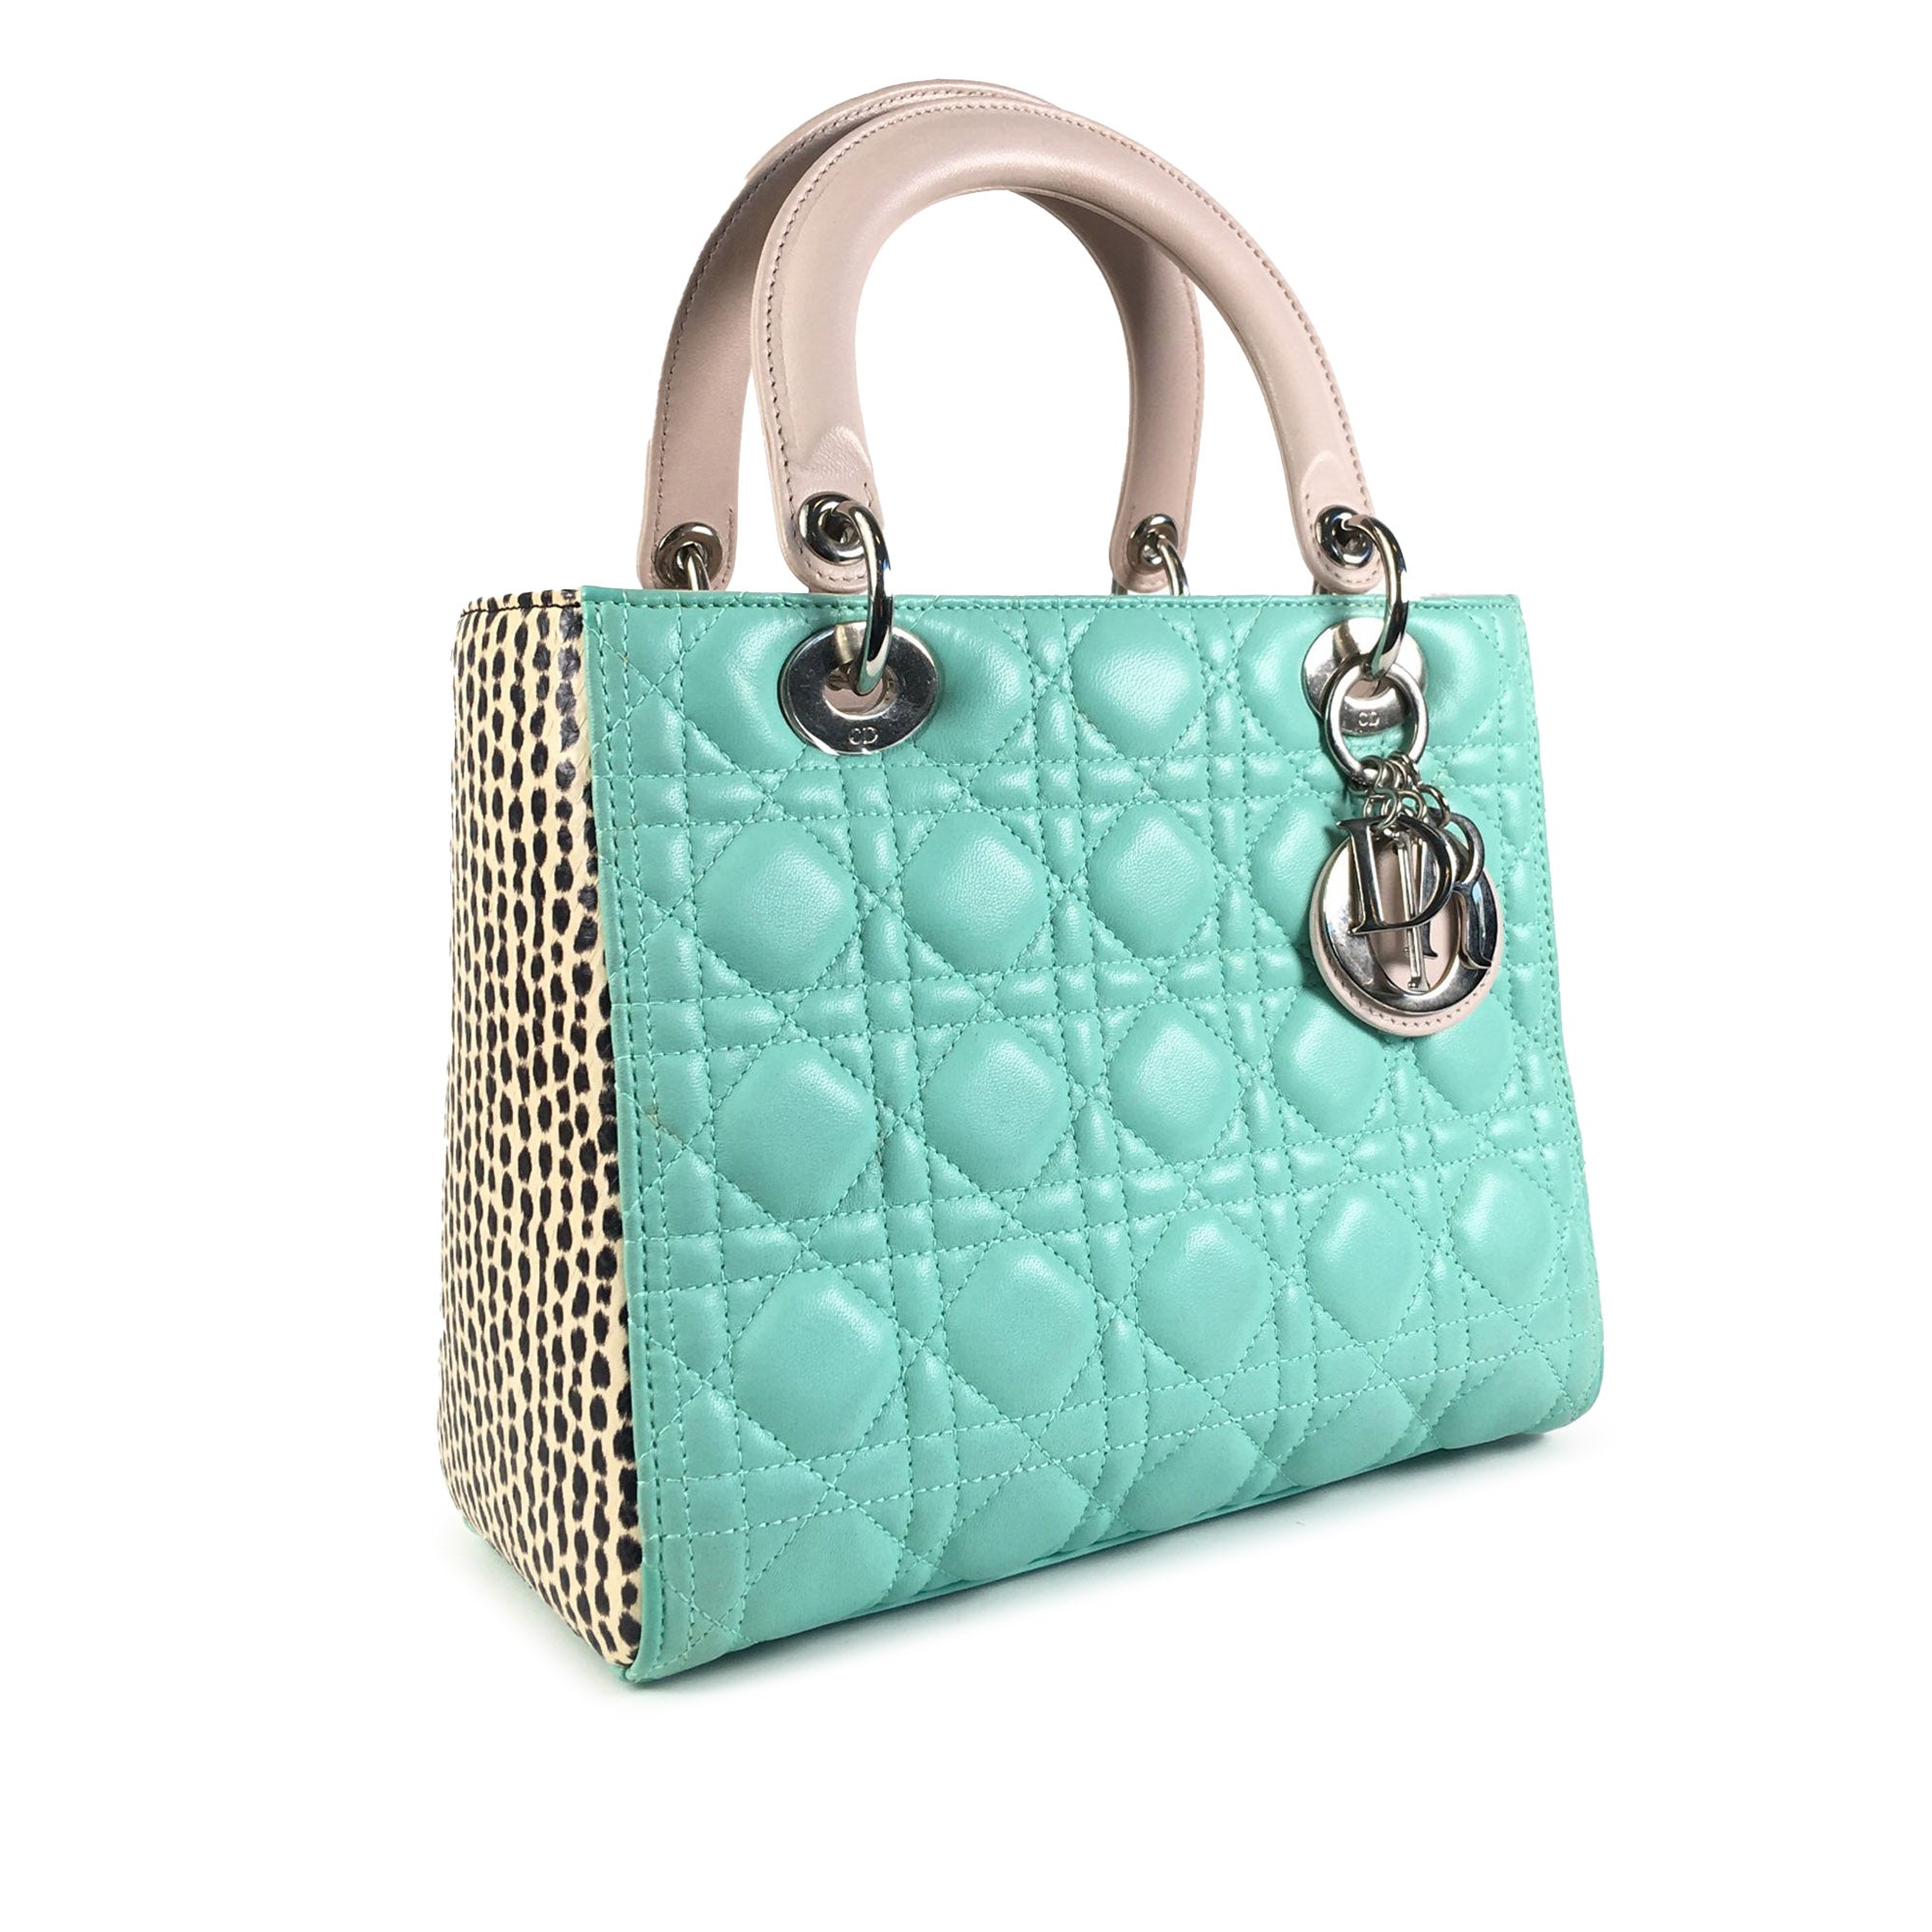 Lady Dior Medium Tricolor Lambskin and Python Cannage